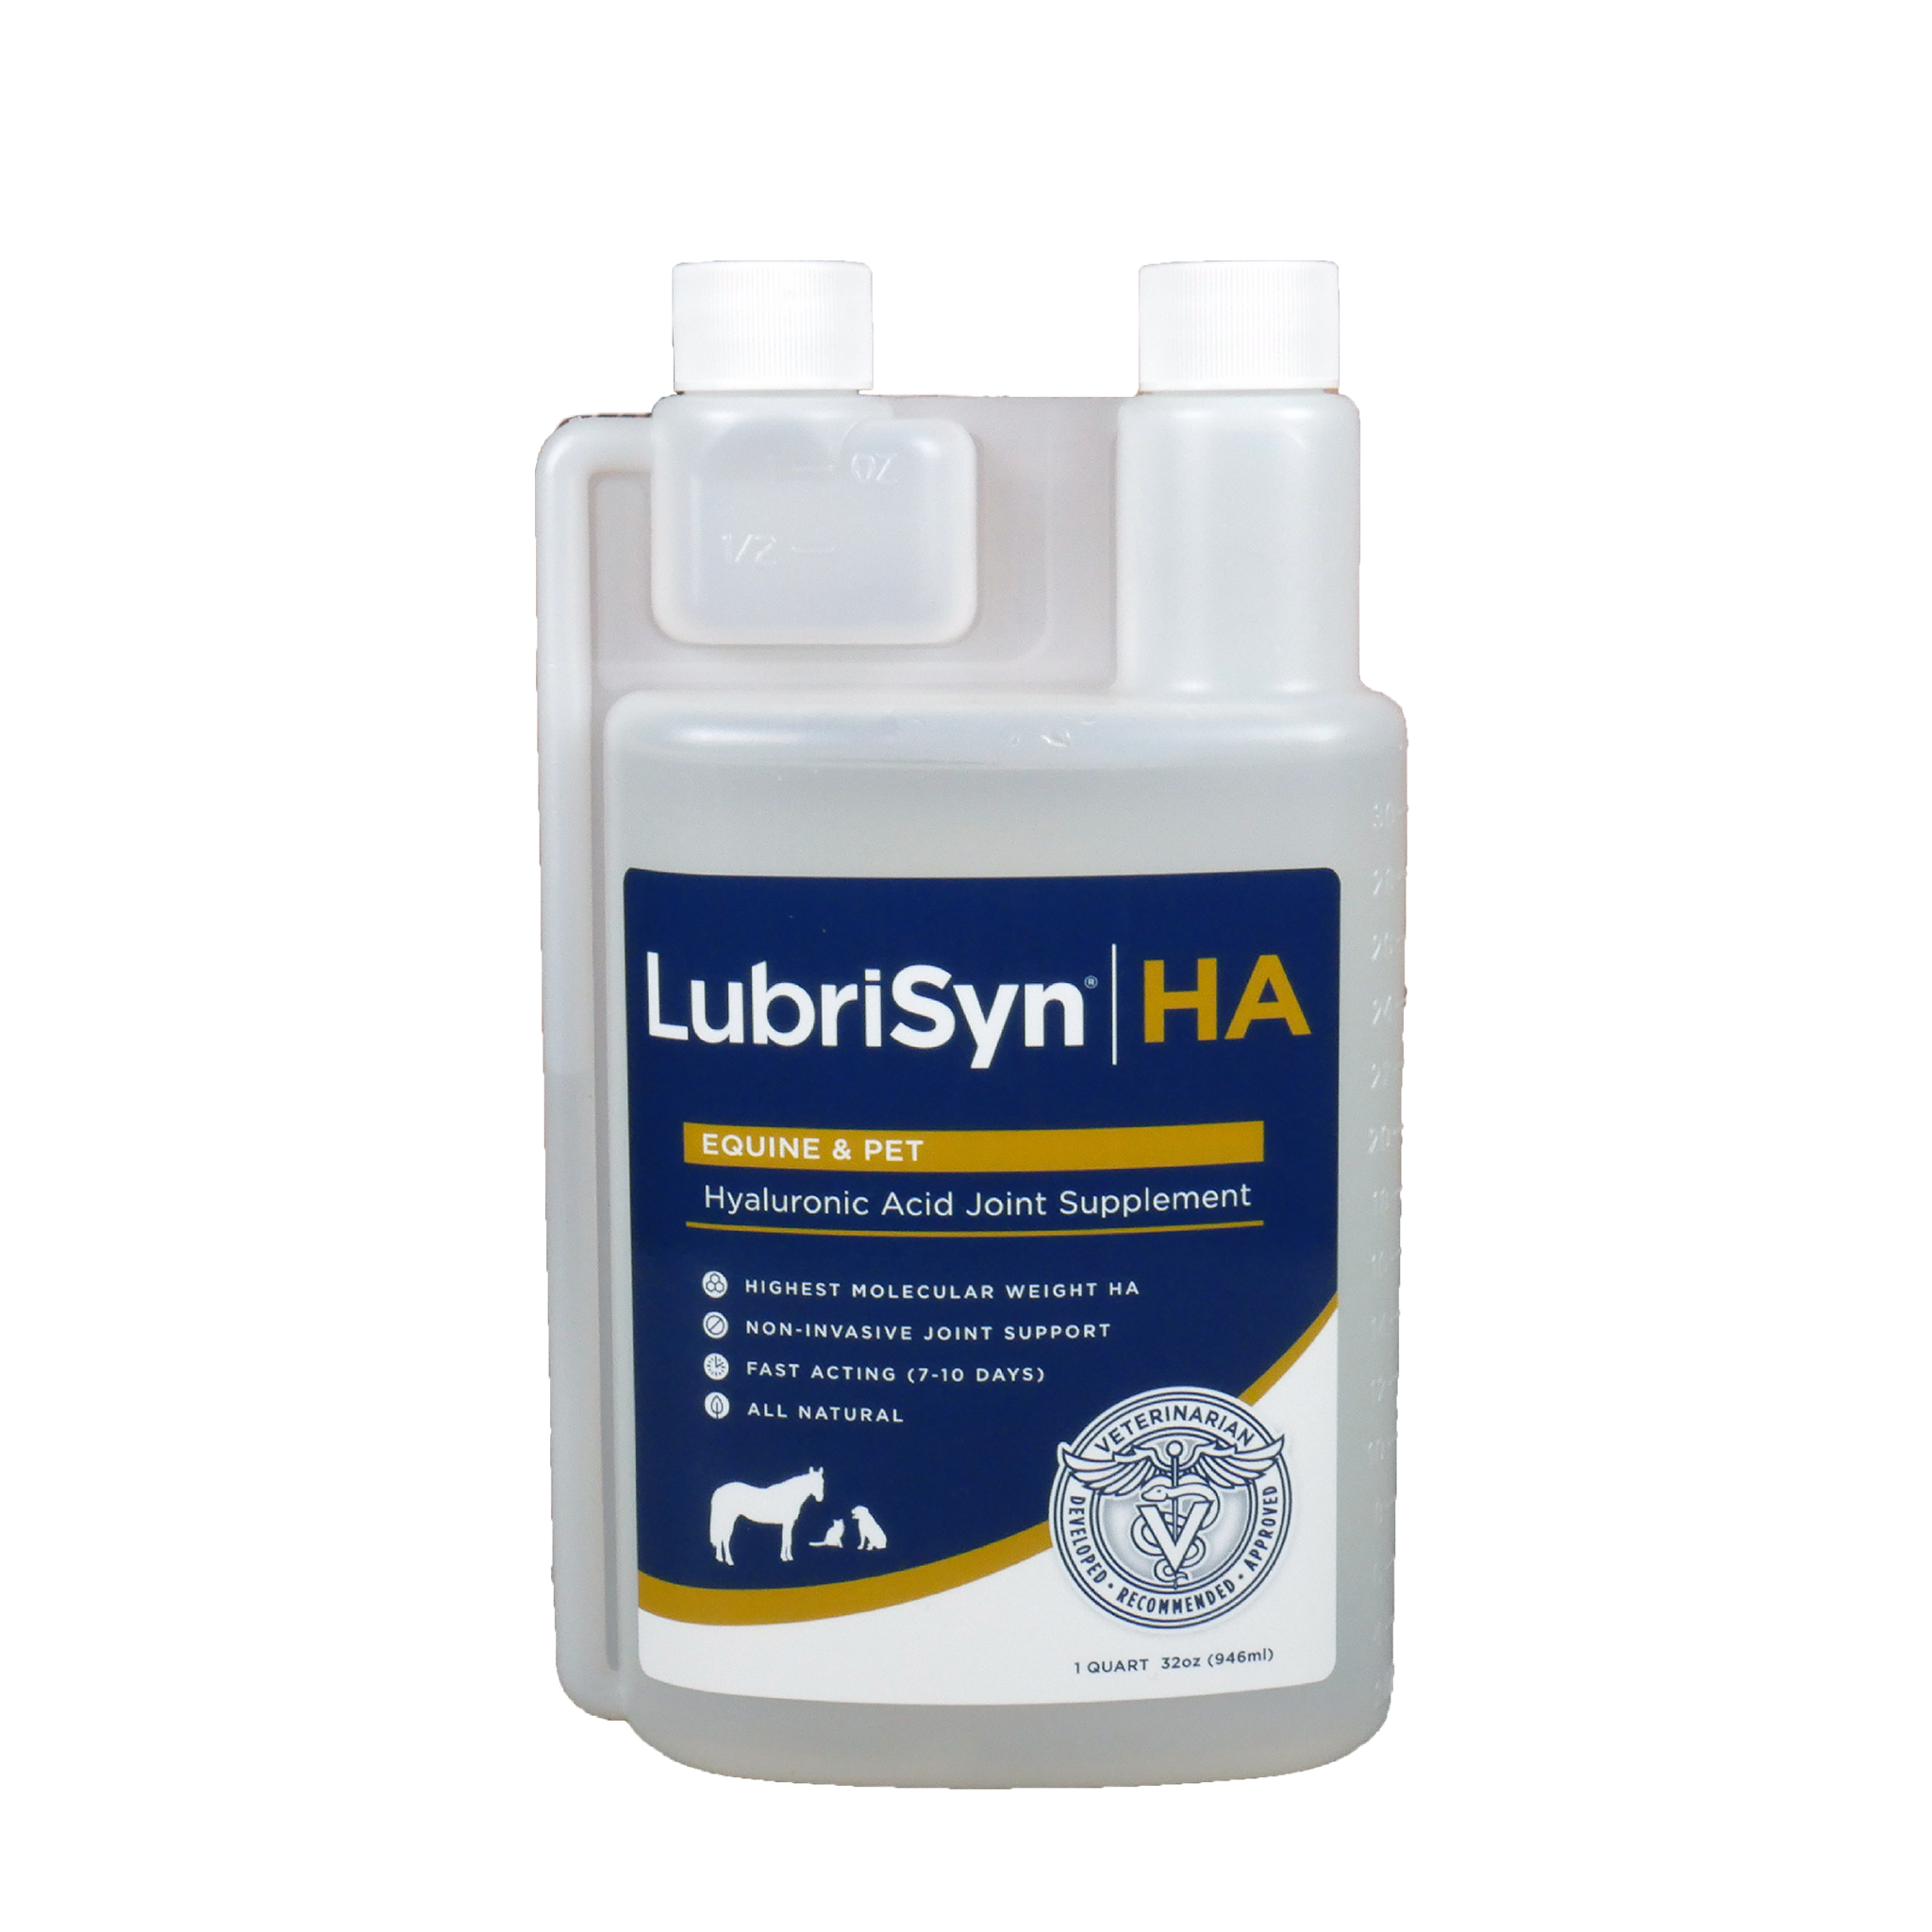 LubriSyn HA pet and equine quart bottle with squeeze measuring function.